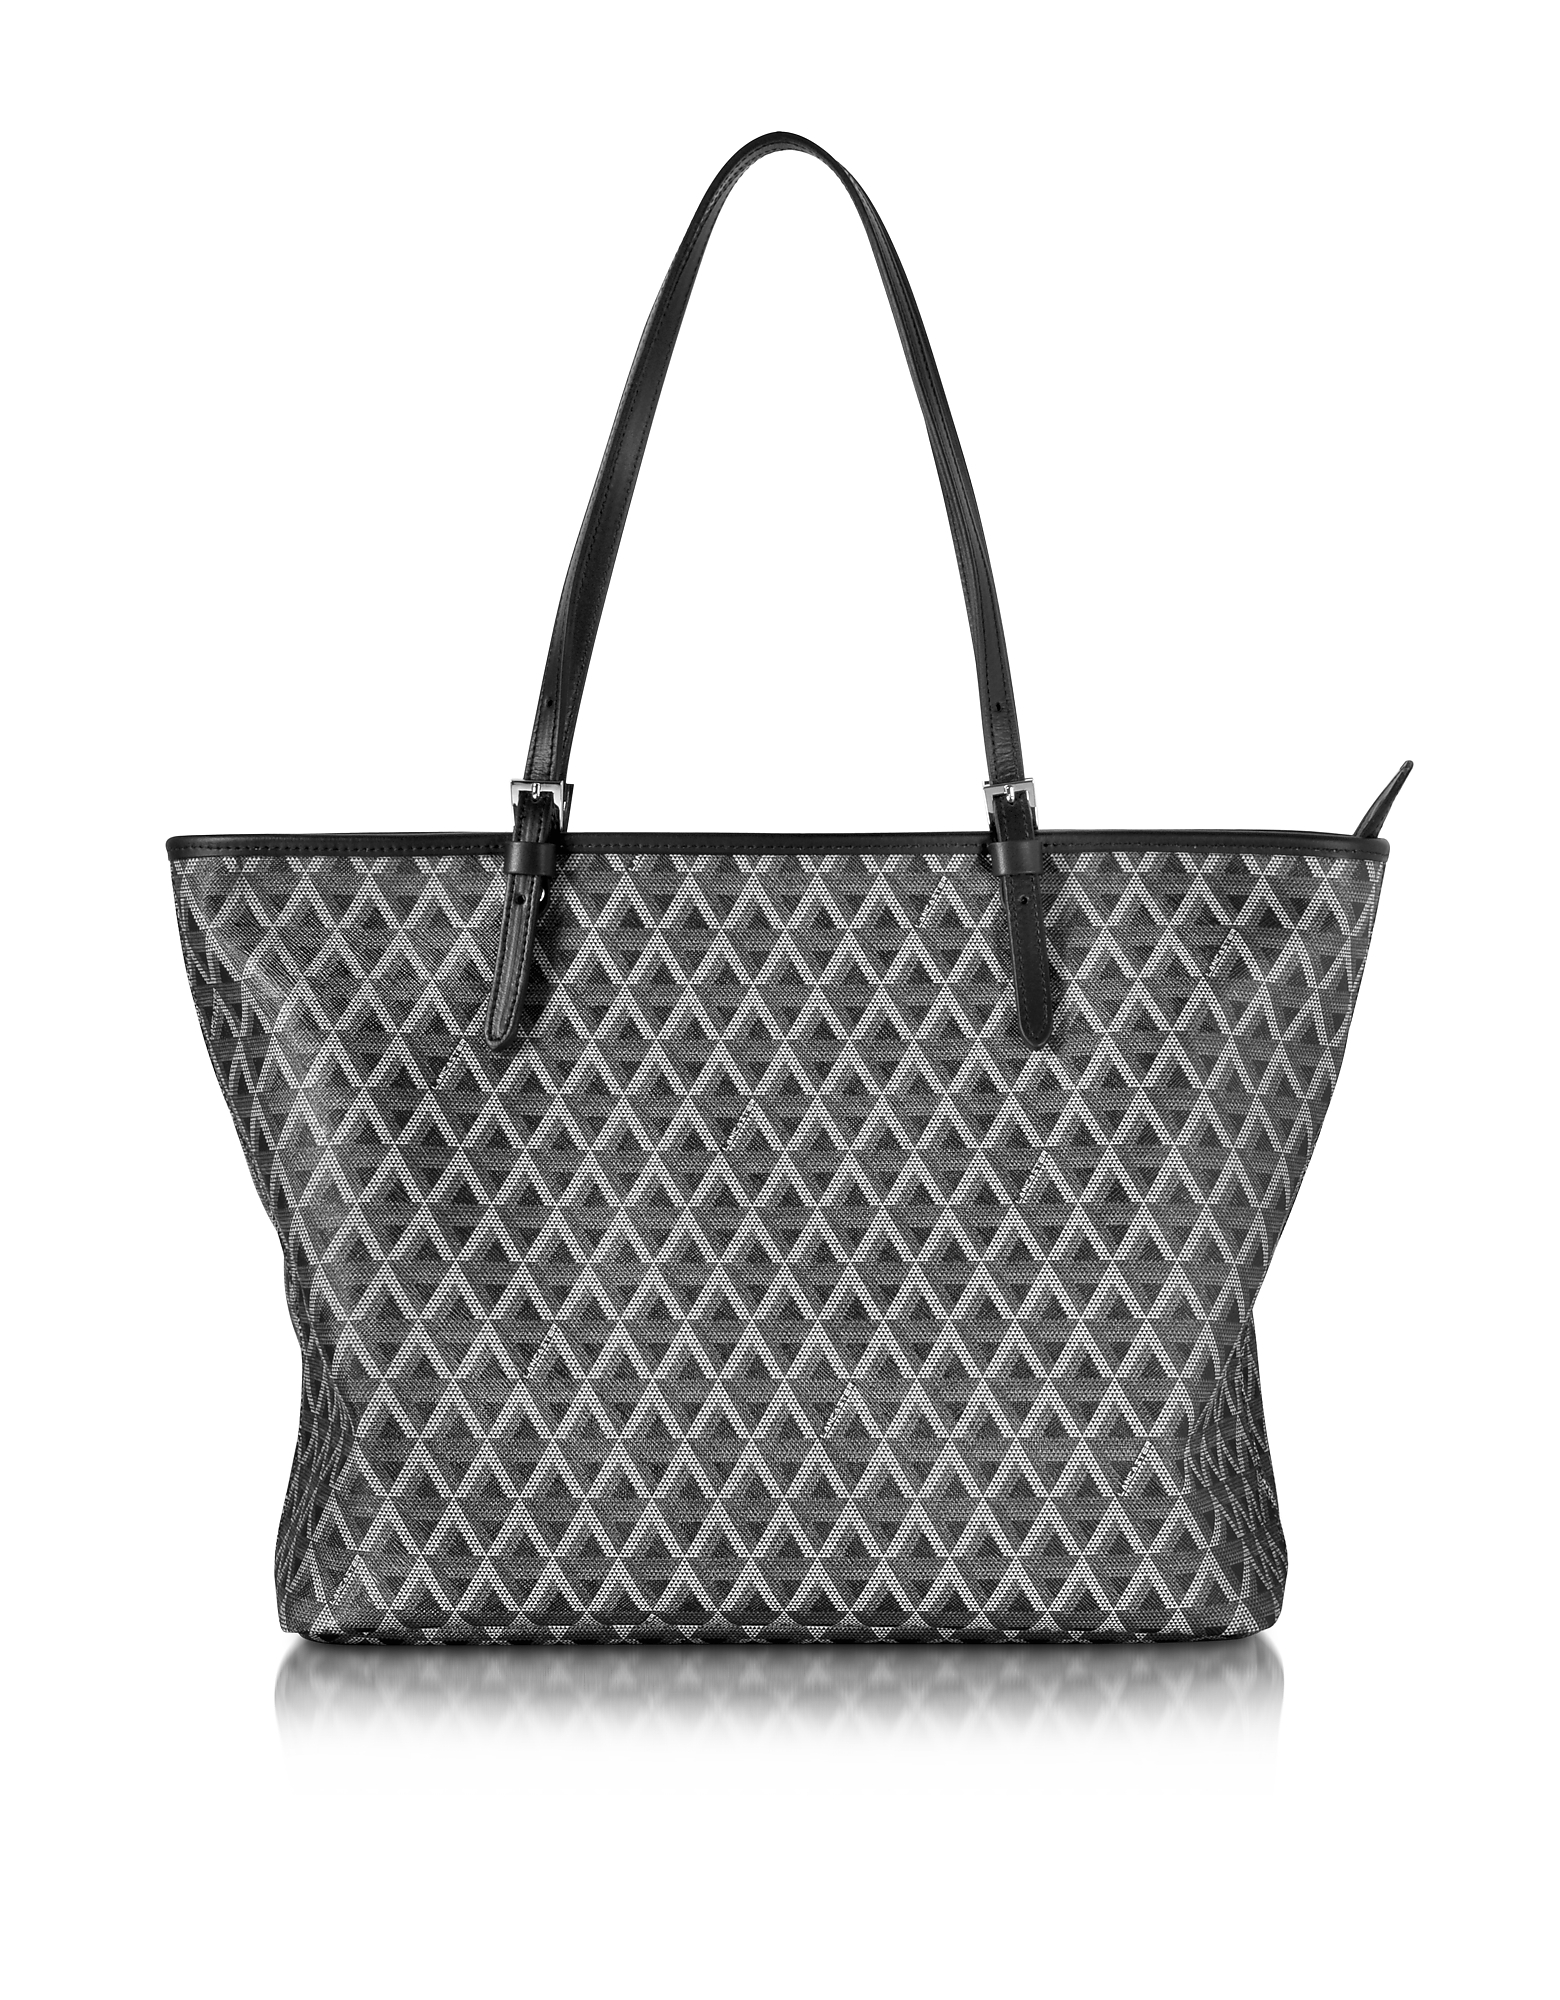 LANCASTER DESIGNER HANDBAGS IKON PRINTED COATED CANVAS AND LEATHER TOTE